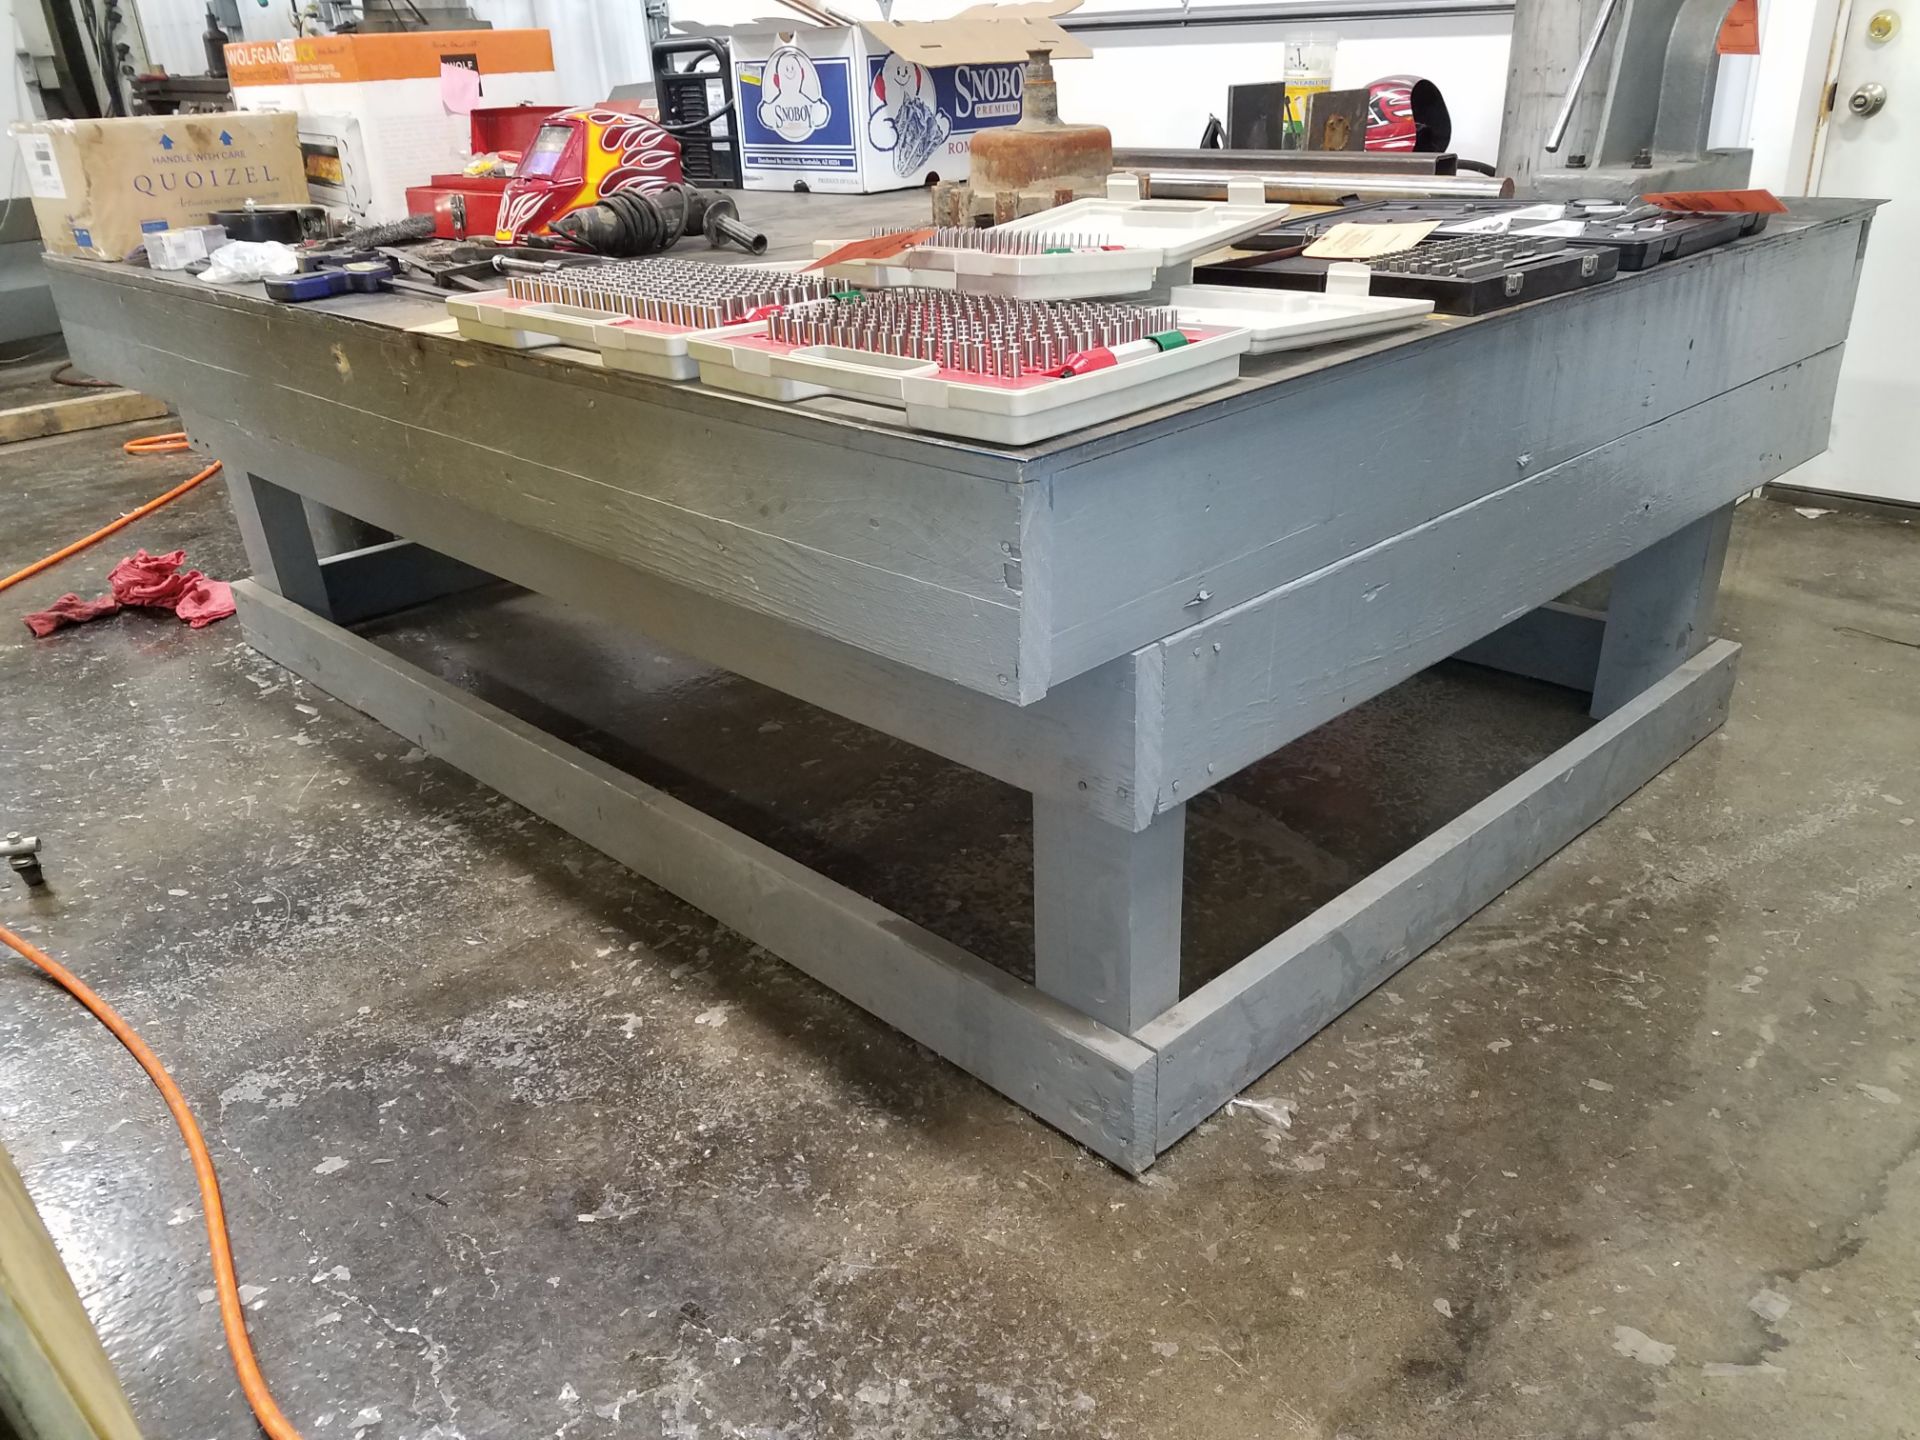 6' X 8' TABLE WOOD FRAME/STEEL PLATE TOP (LOCATED AT: 2890 SOUTH MAIN ST., MIDDLETOWN OH 45044)